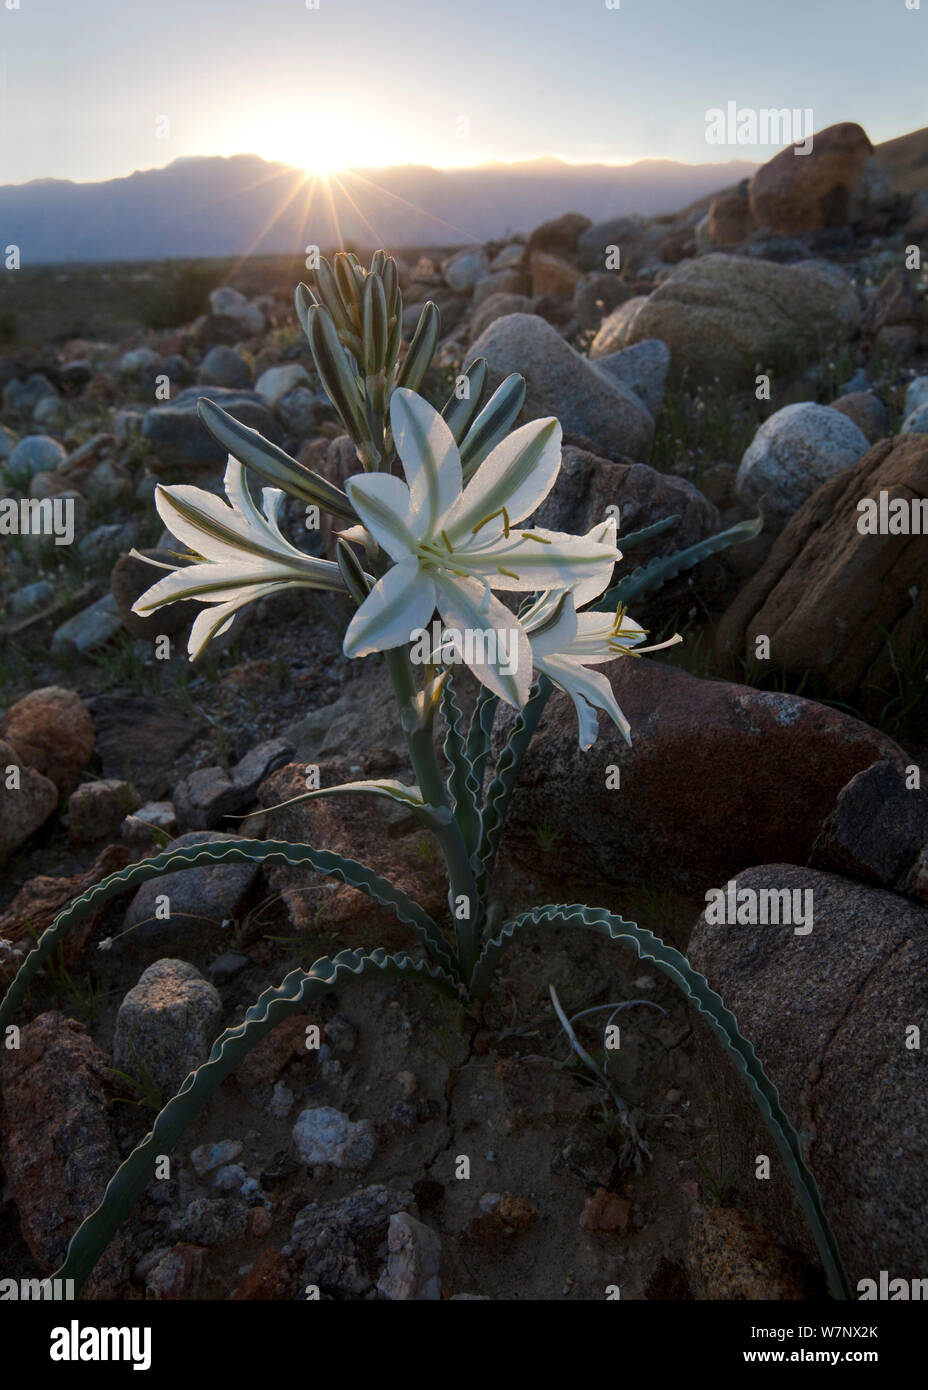 Desert Lily (Hesperocallis undulata) which only in years when there enough rainfall, Anza Borrego Desert State Park, California, USA. March. Stock Photo